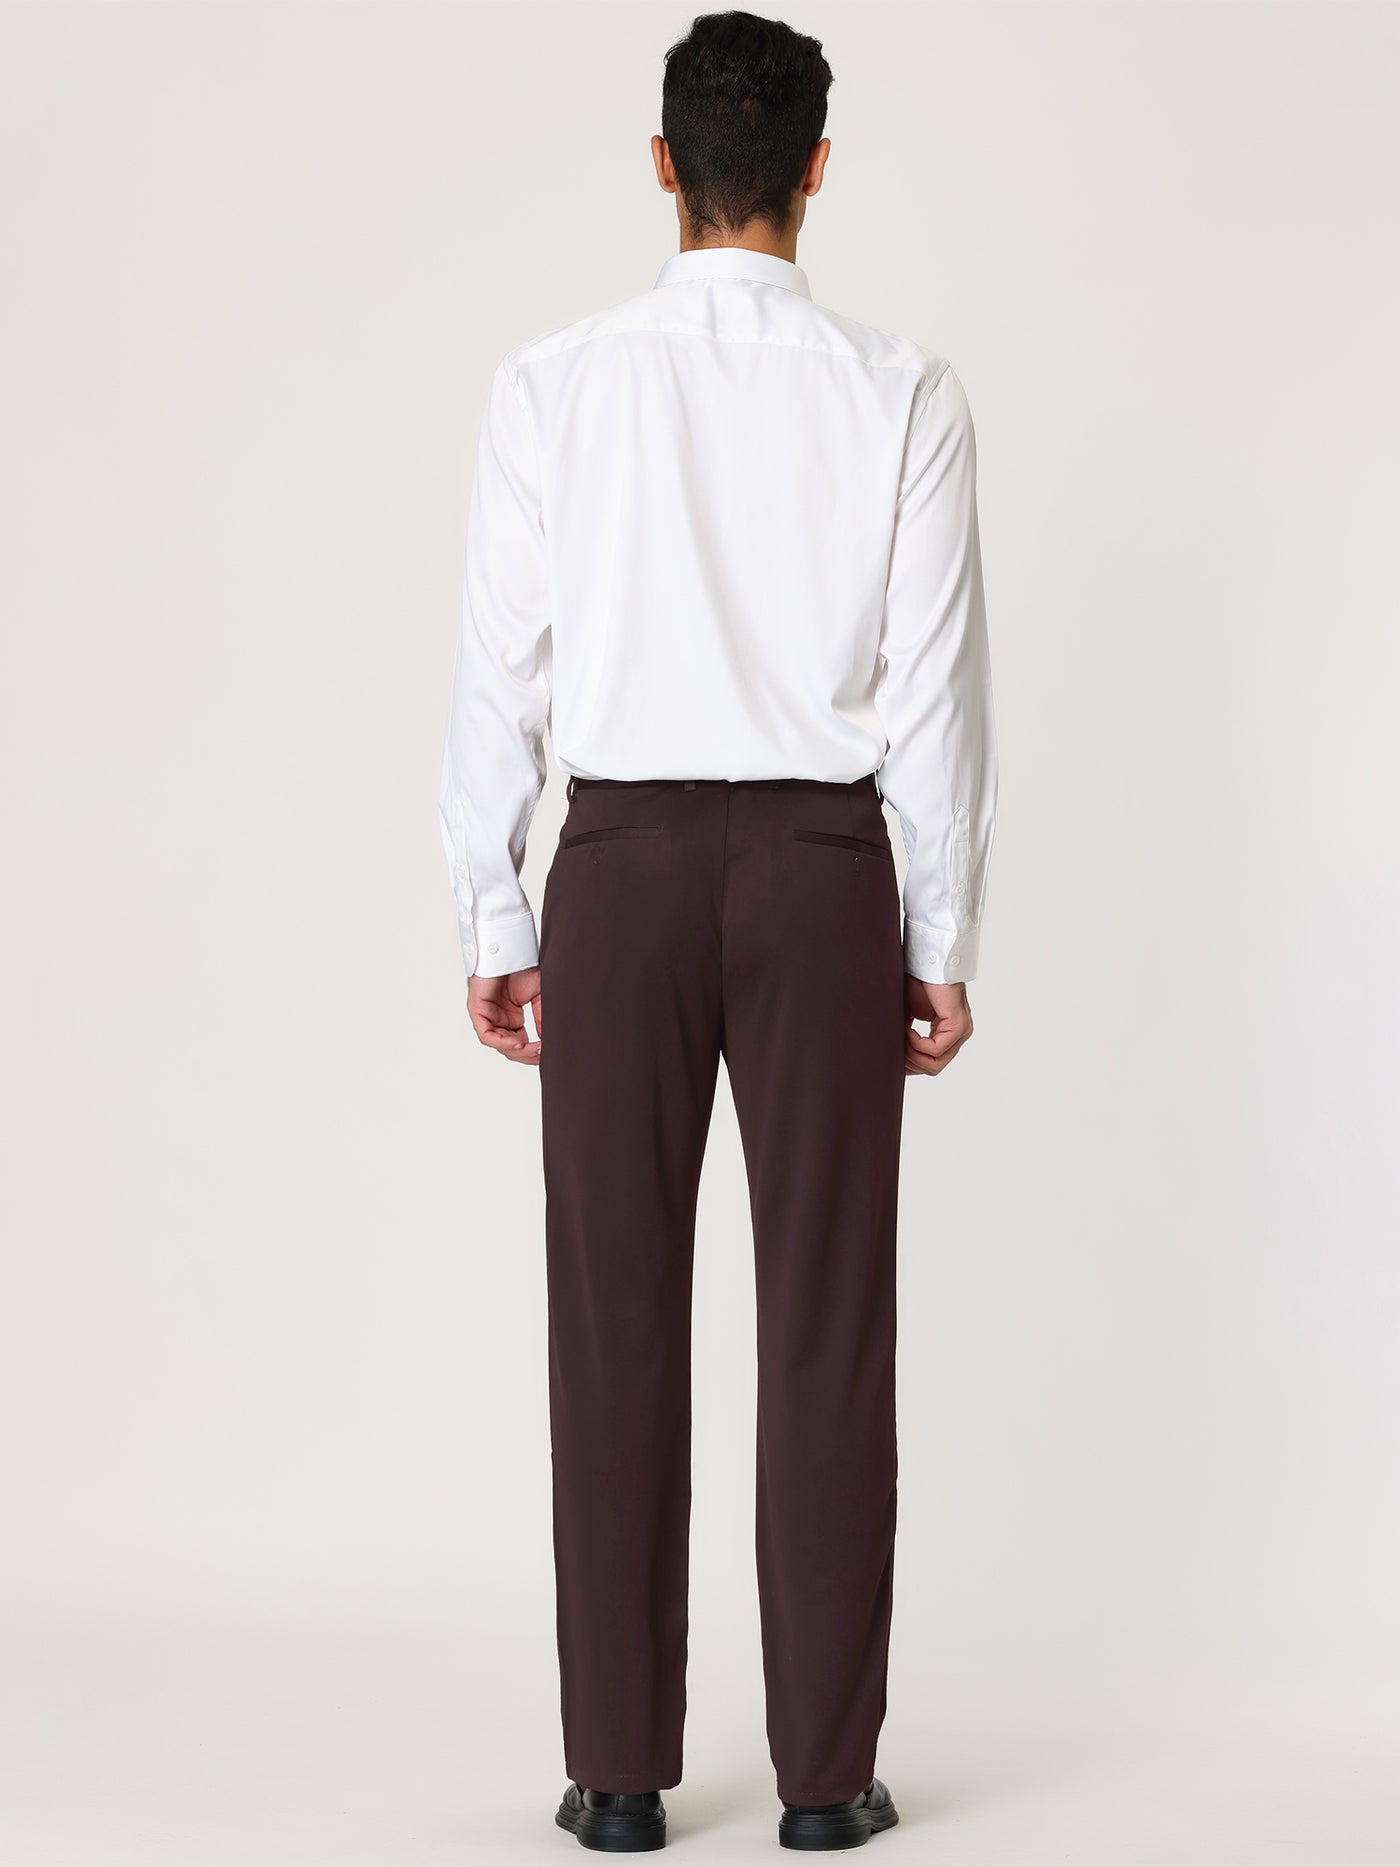 Bublédon Classic Straight Flat Front Solid Business Trousers